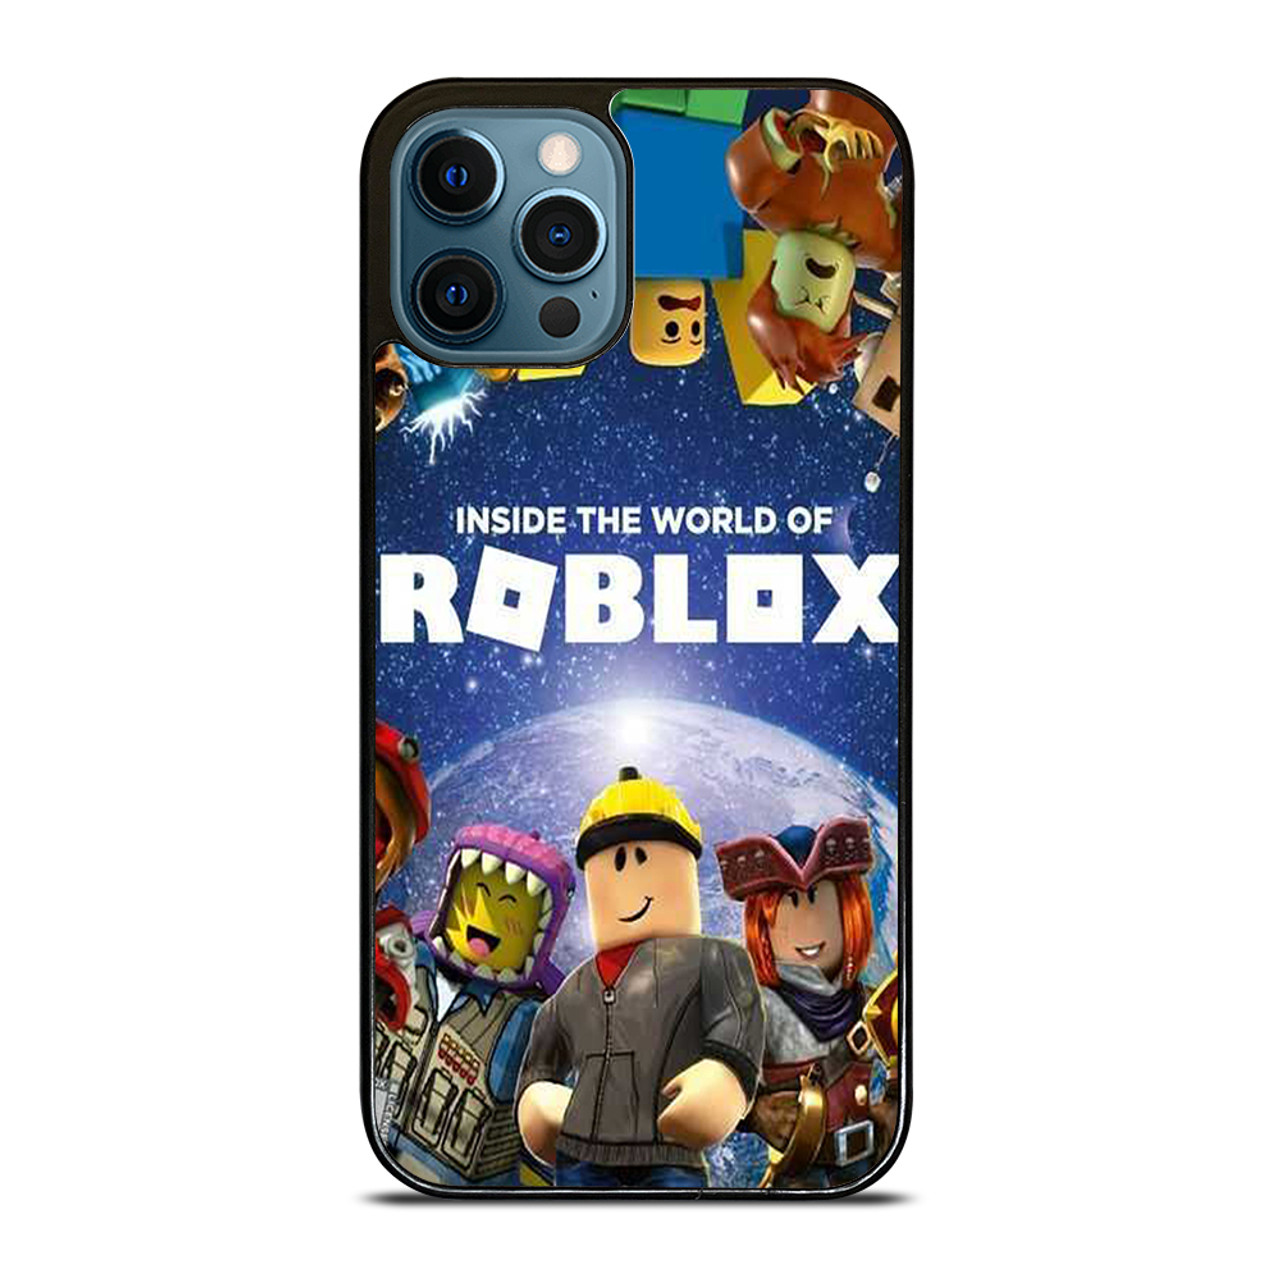 https://cdn11.bigcommerce.com/s-1obwgivpkz/images/stencil/1280x1280/products/128500/142592/ROBLOX%20GAME__41495.1691858896.jpg?c=1